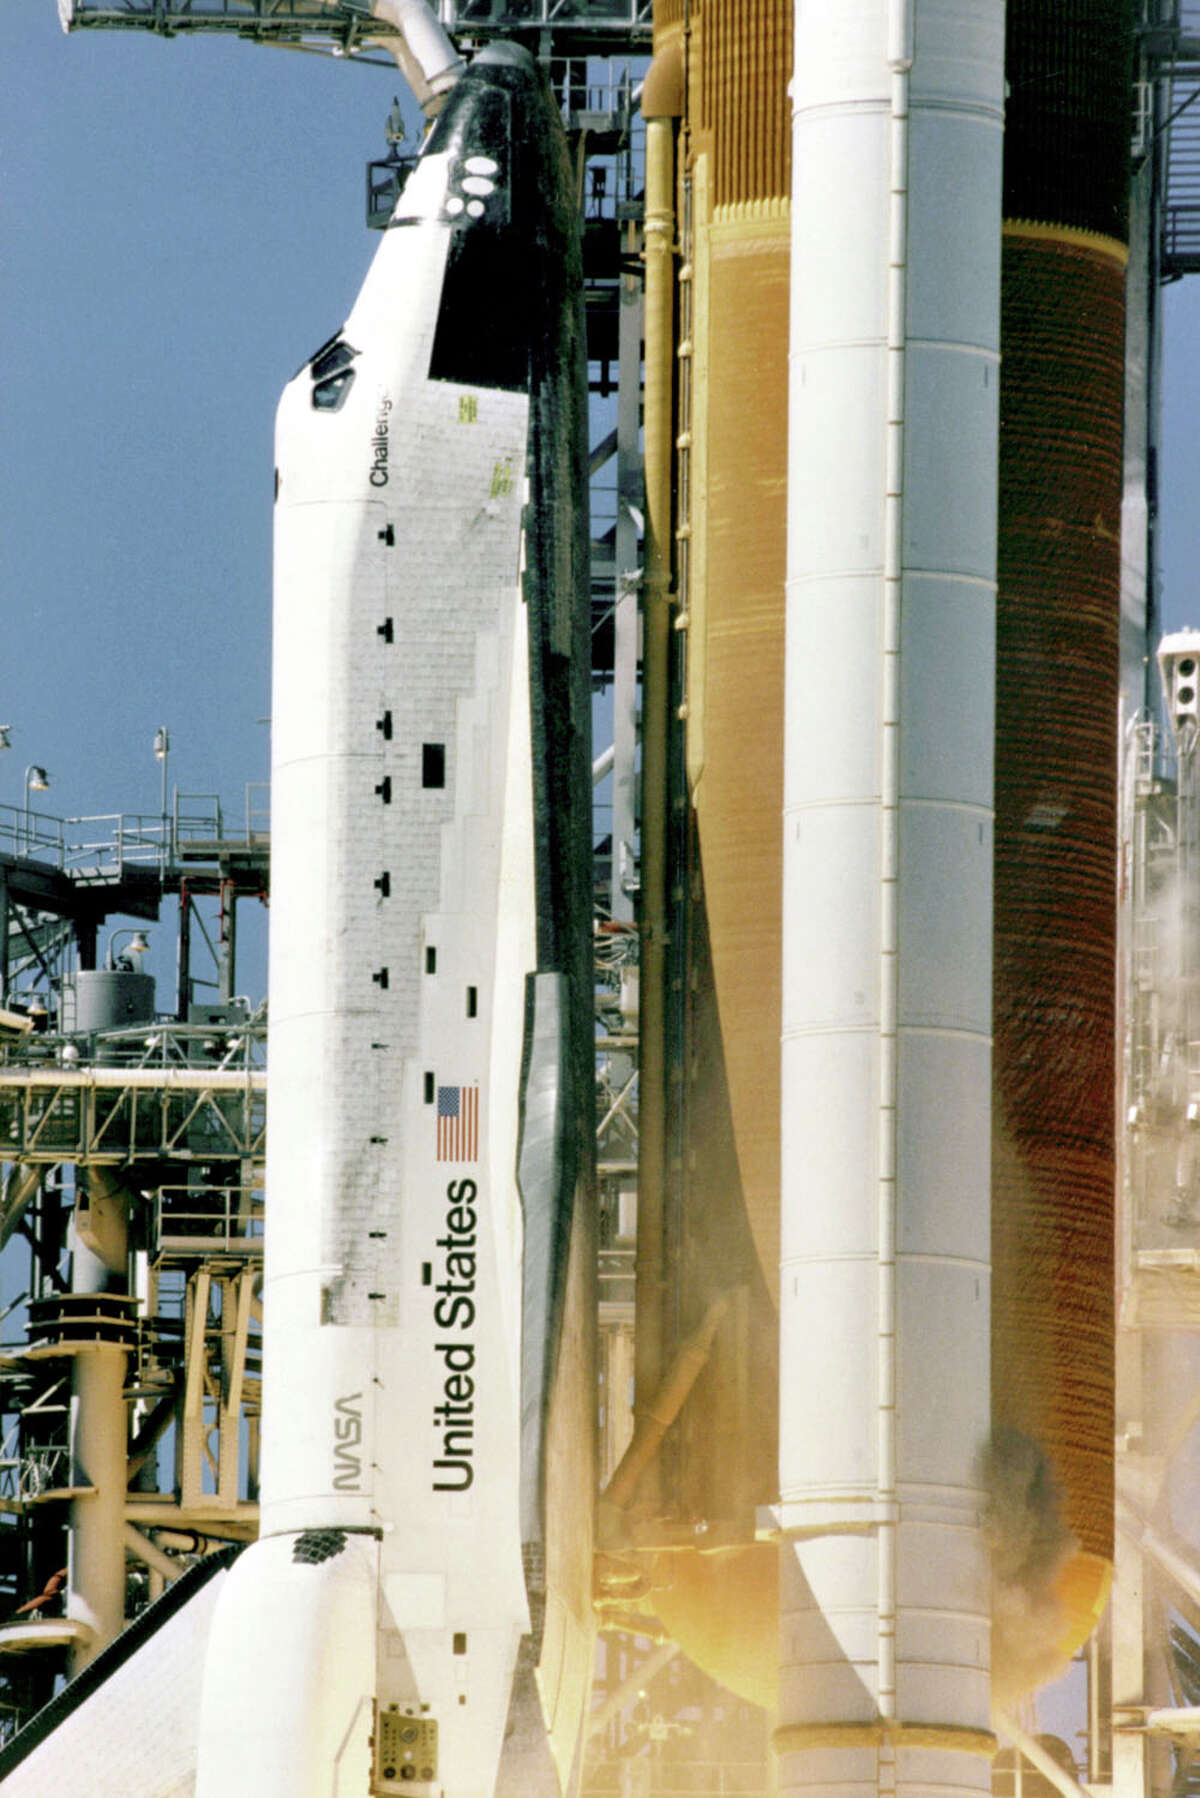 Space Shuttle Challenger is prepared for launch on Jan. 28, 1986, at Kennedy Space Center, Fla.